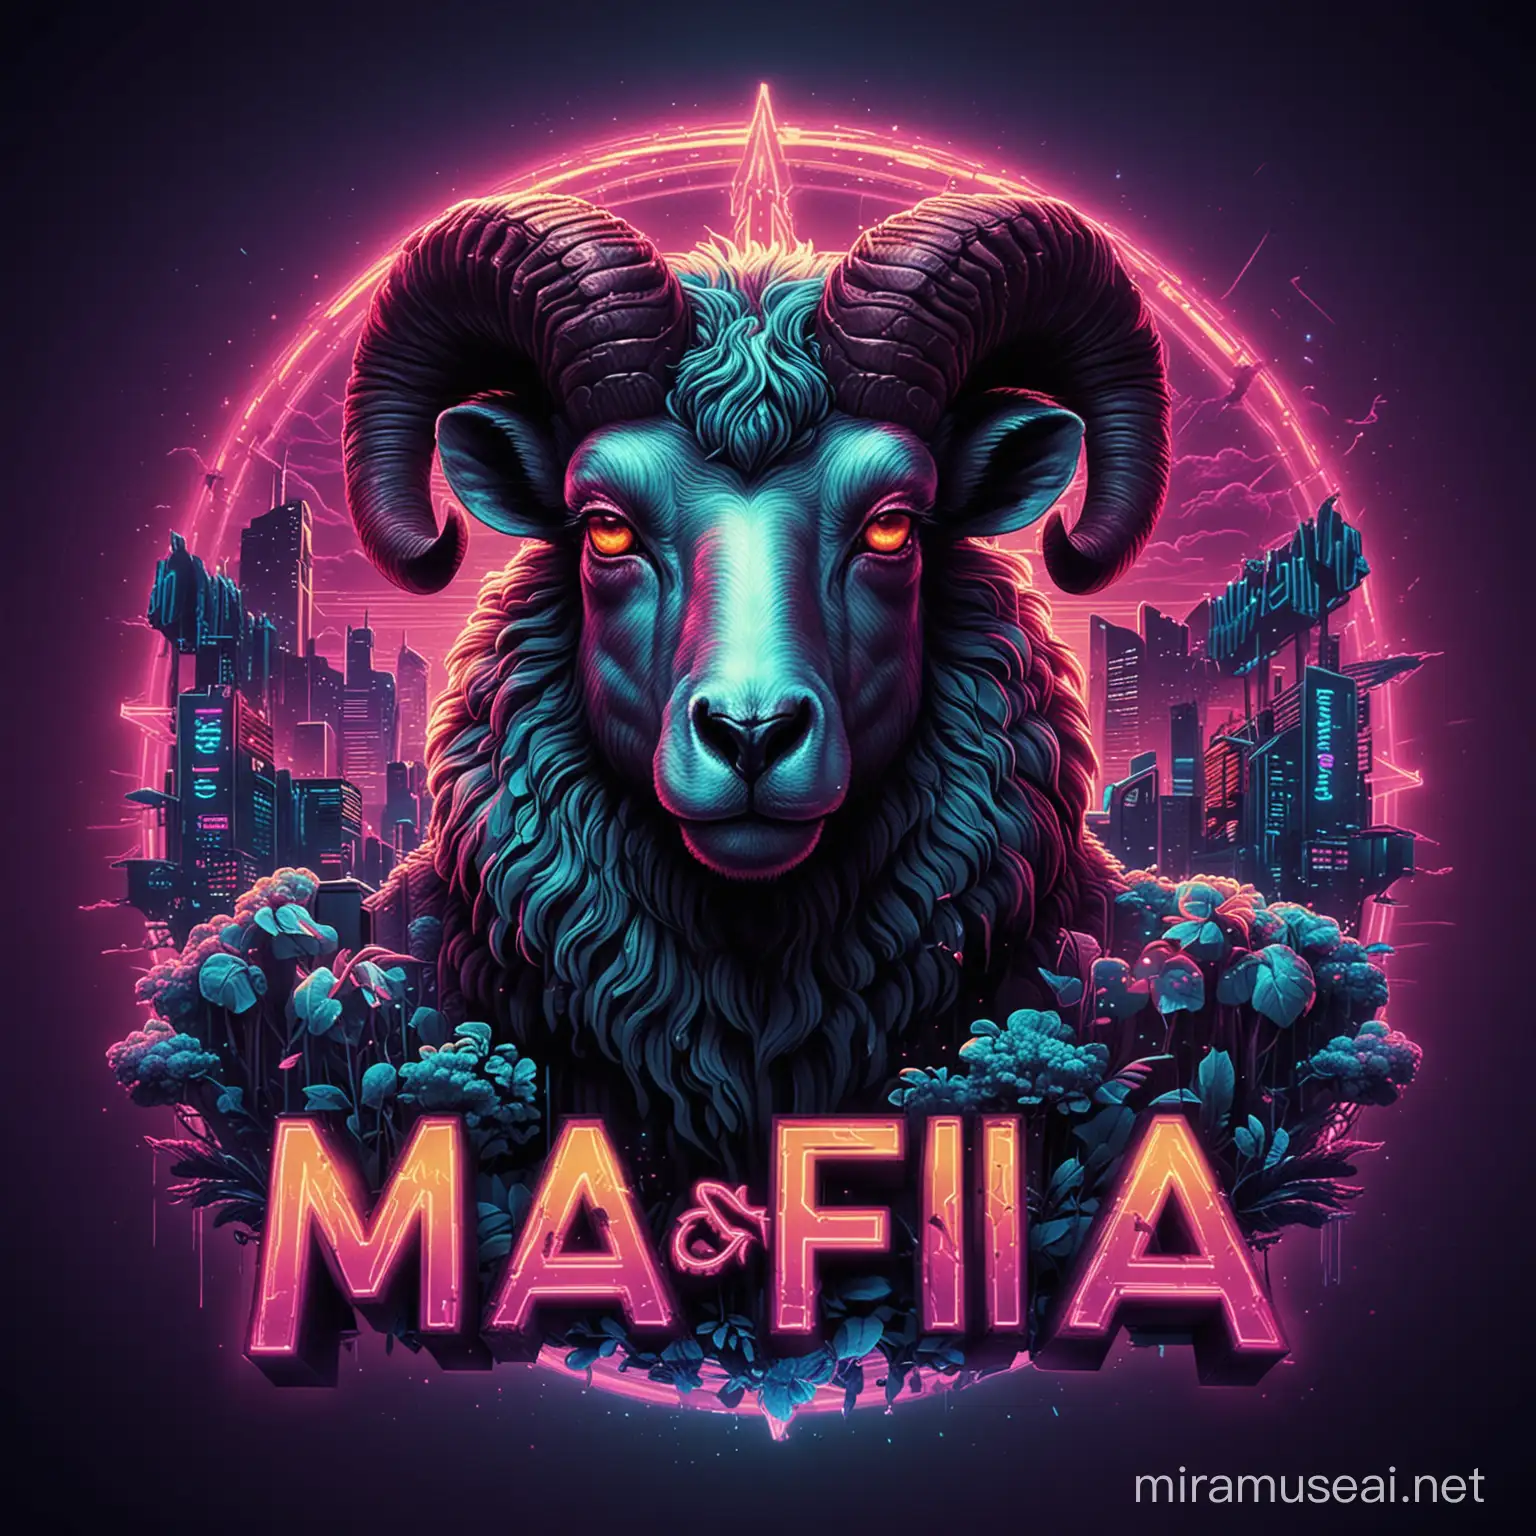 A striking 2D vector design featuring chaos with the bold neon-lit text "Mafia Wedus". The central image is a stylized sheep's head, horned sheep, exuding a sense of unease. The design is rendered in high definition, with intricate details and synthwave colors. The overall effect is a captivating visual experience, merging modern design elements with a sense of urban grit.